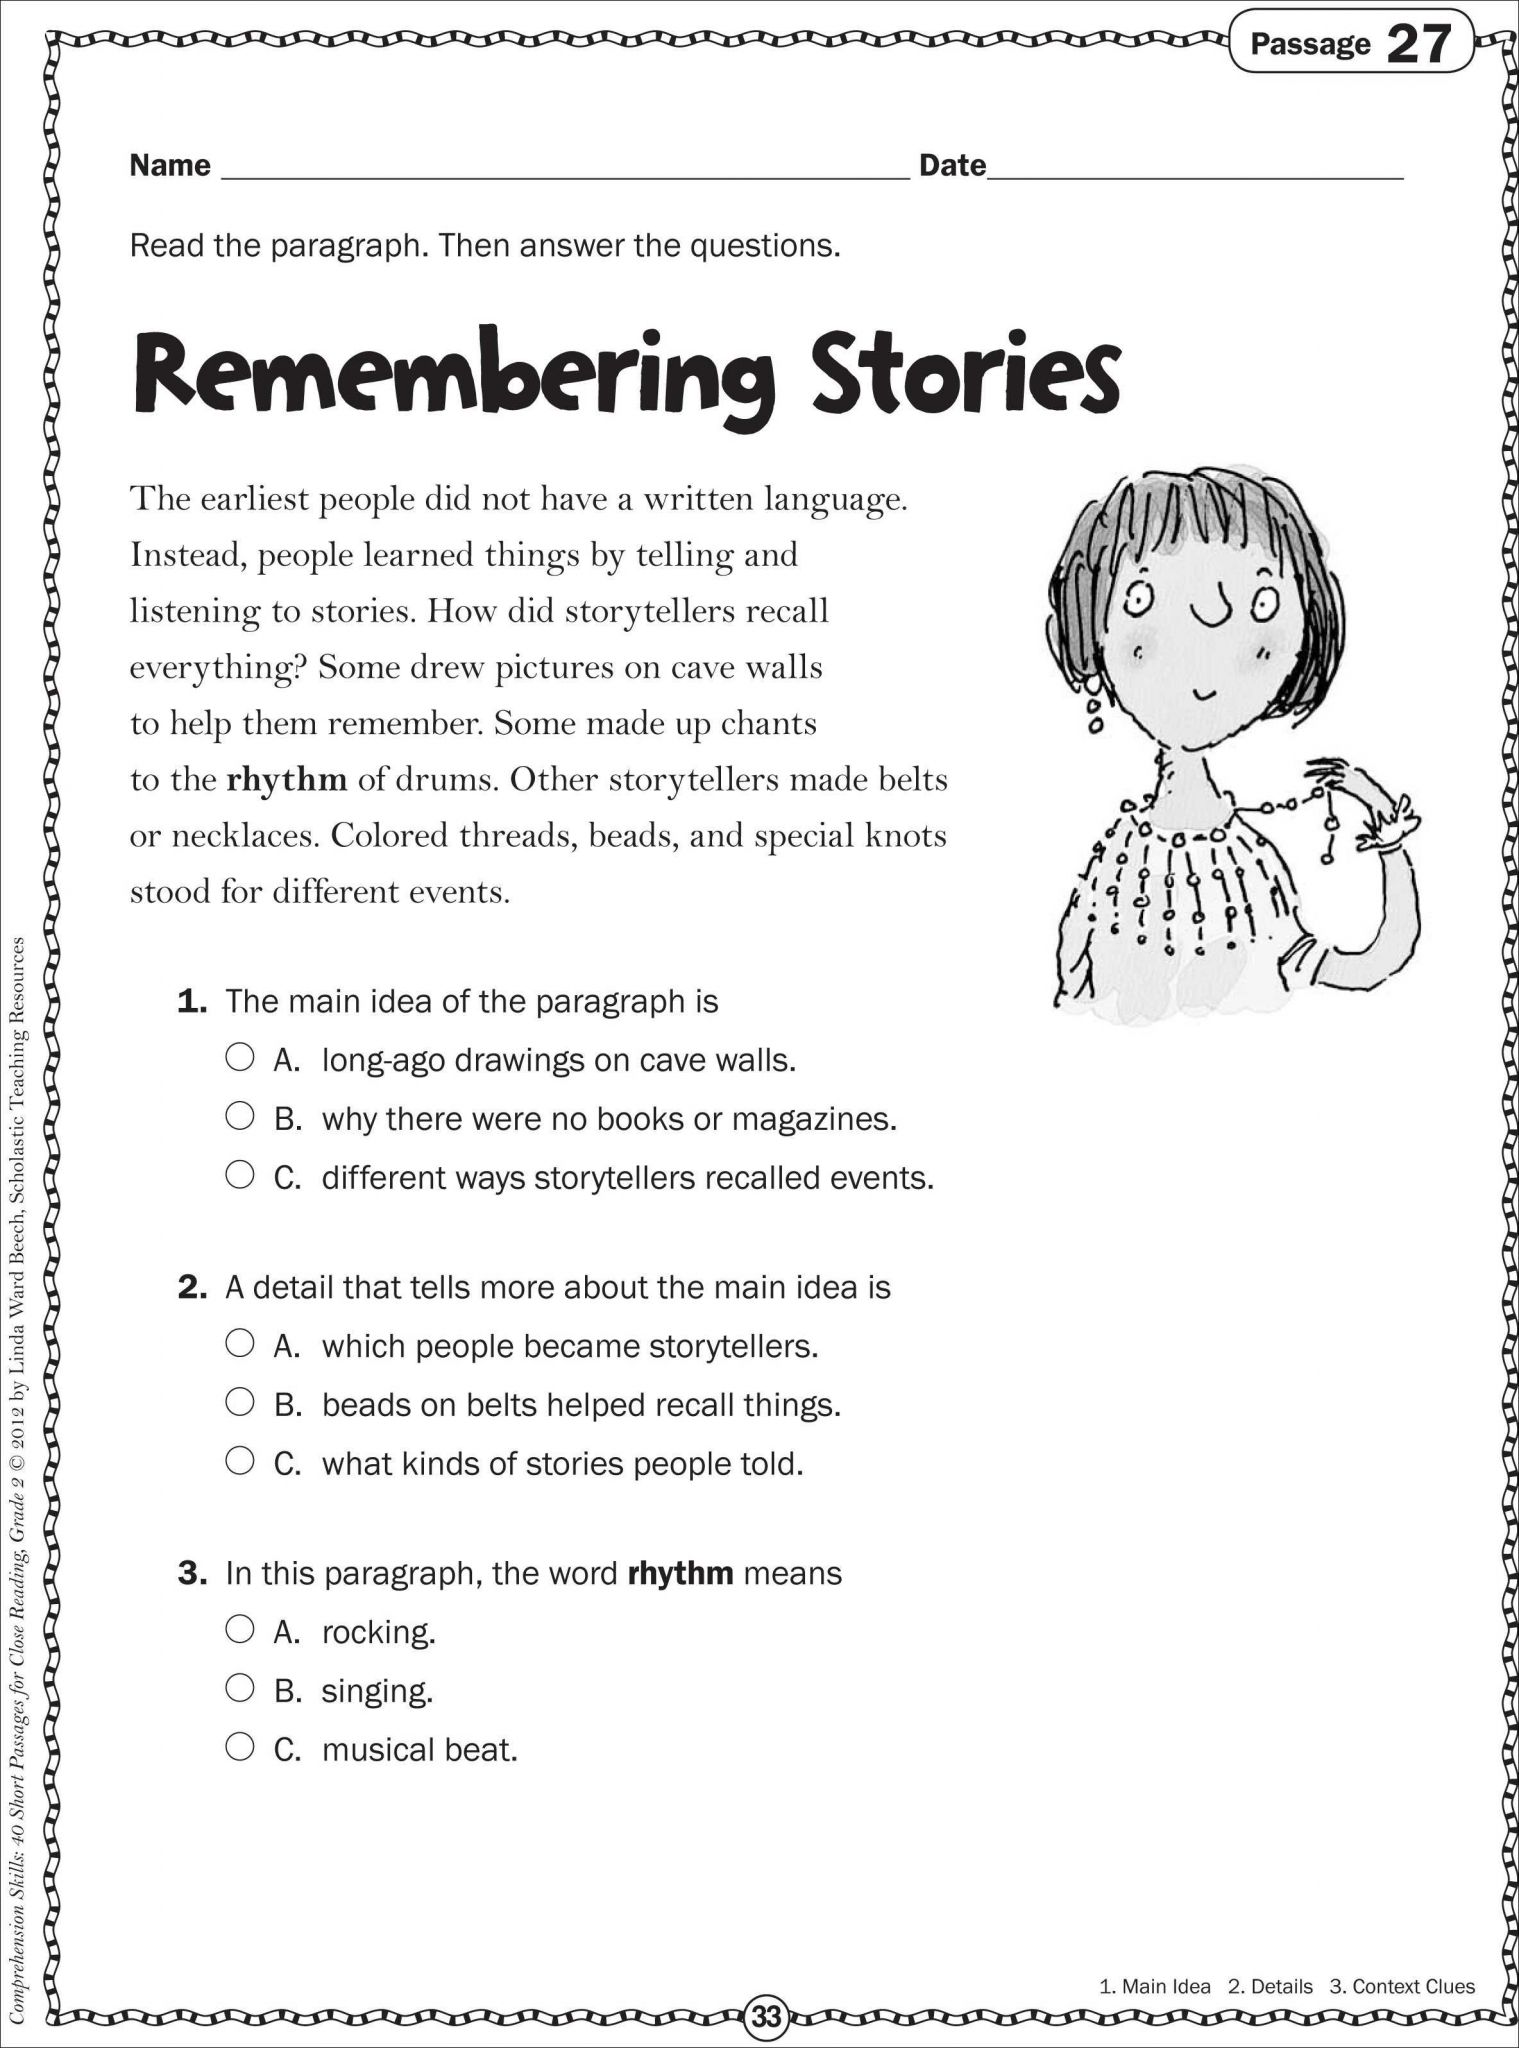 Reading Skills and Strategies Worksheet Animal Farm Along with 2nd Grade Reading Worksheets & Second Grade Reading Worksheet 1